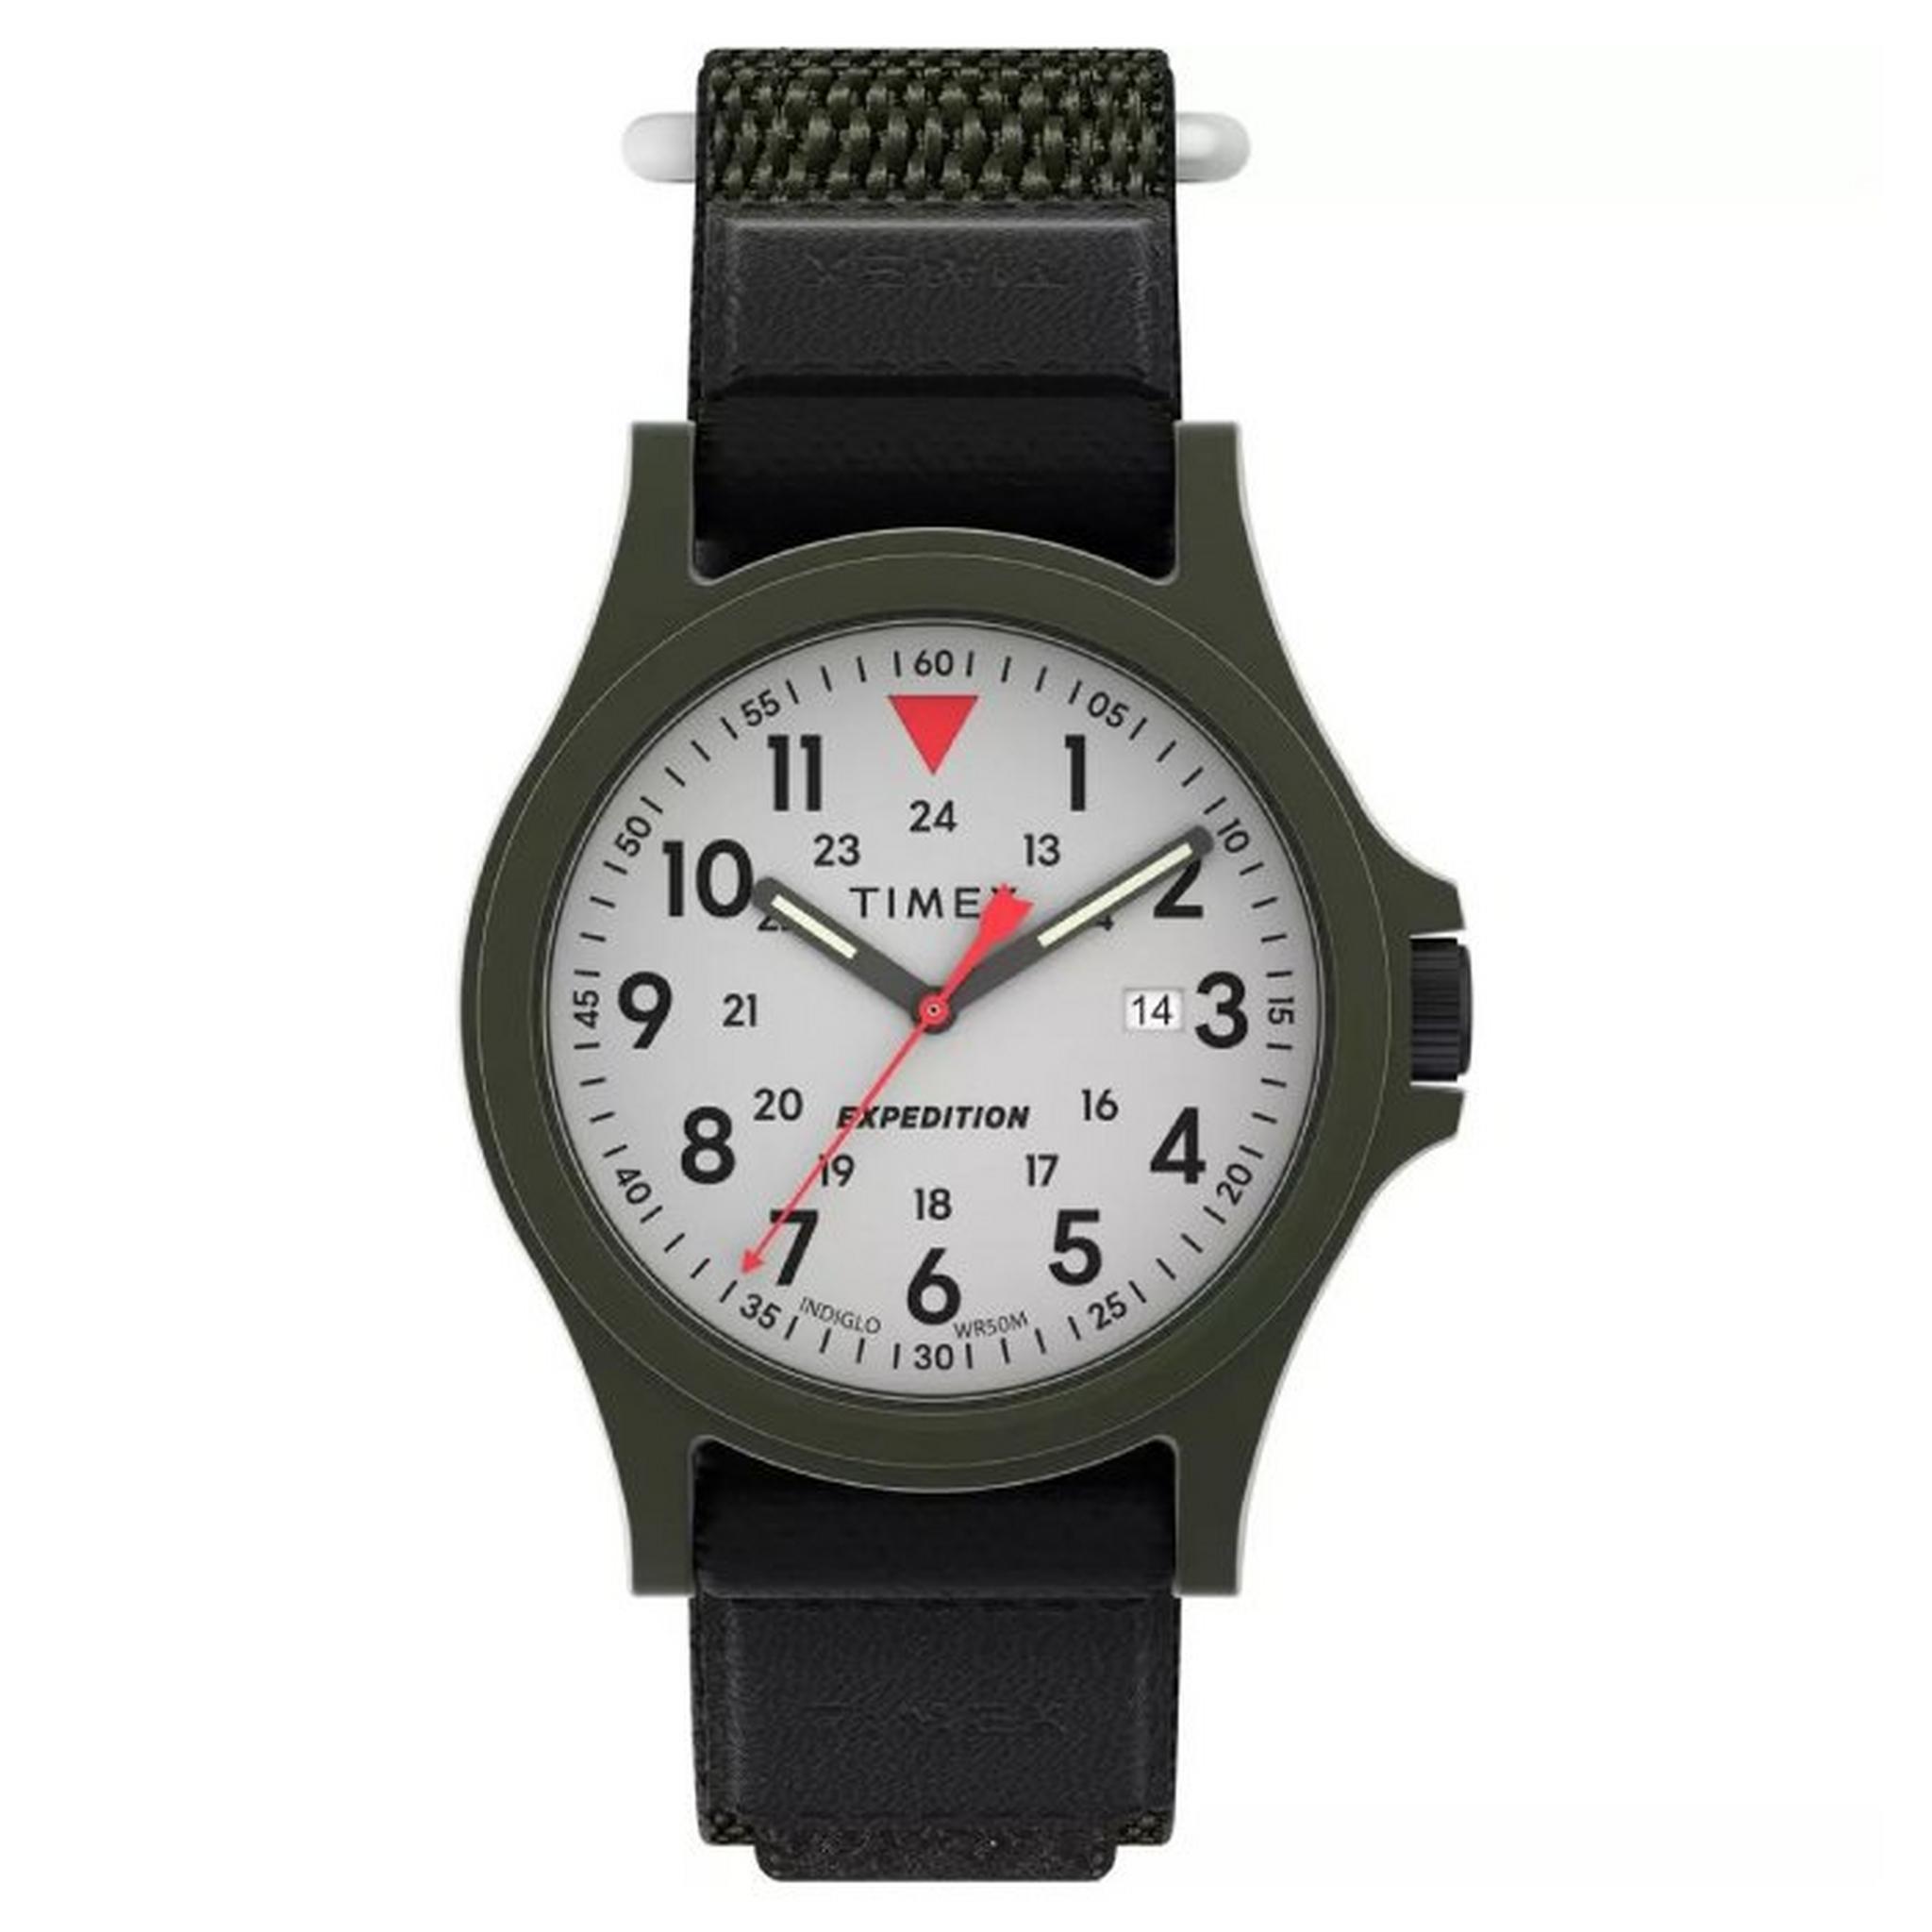 Timex Expedition Acadia Watch for Men, Analog, 40mm, Fabric Strap, TW4B29300VM – Green